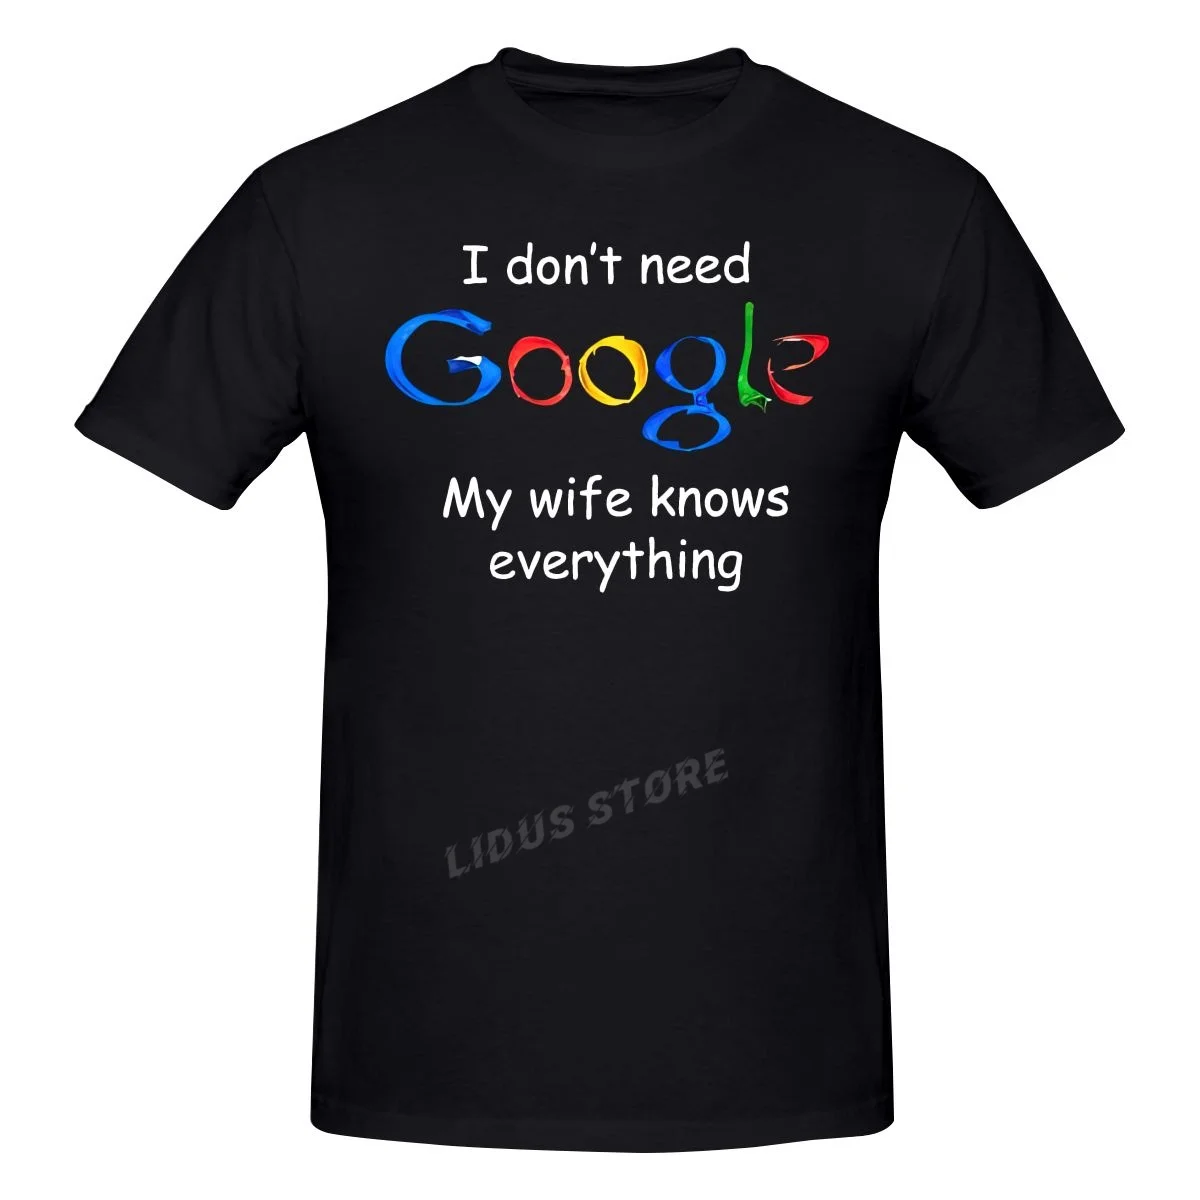 

I Don't Need Google My Wife Knows Everything Funny T-shirt Harajuku Streetwear 100% Cotton Graphics Tshirt Brands Tee Tops